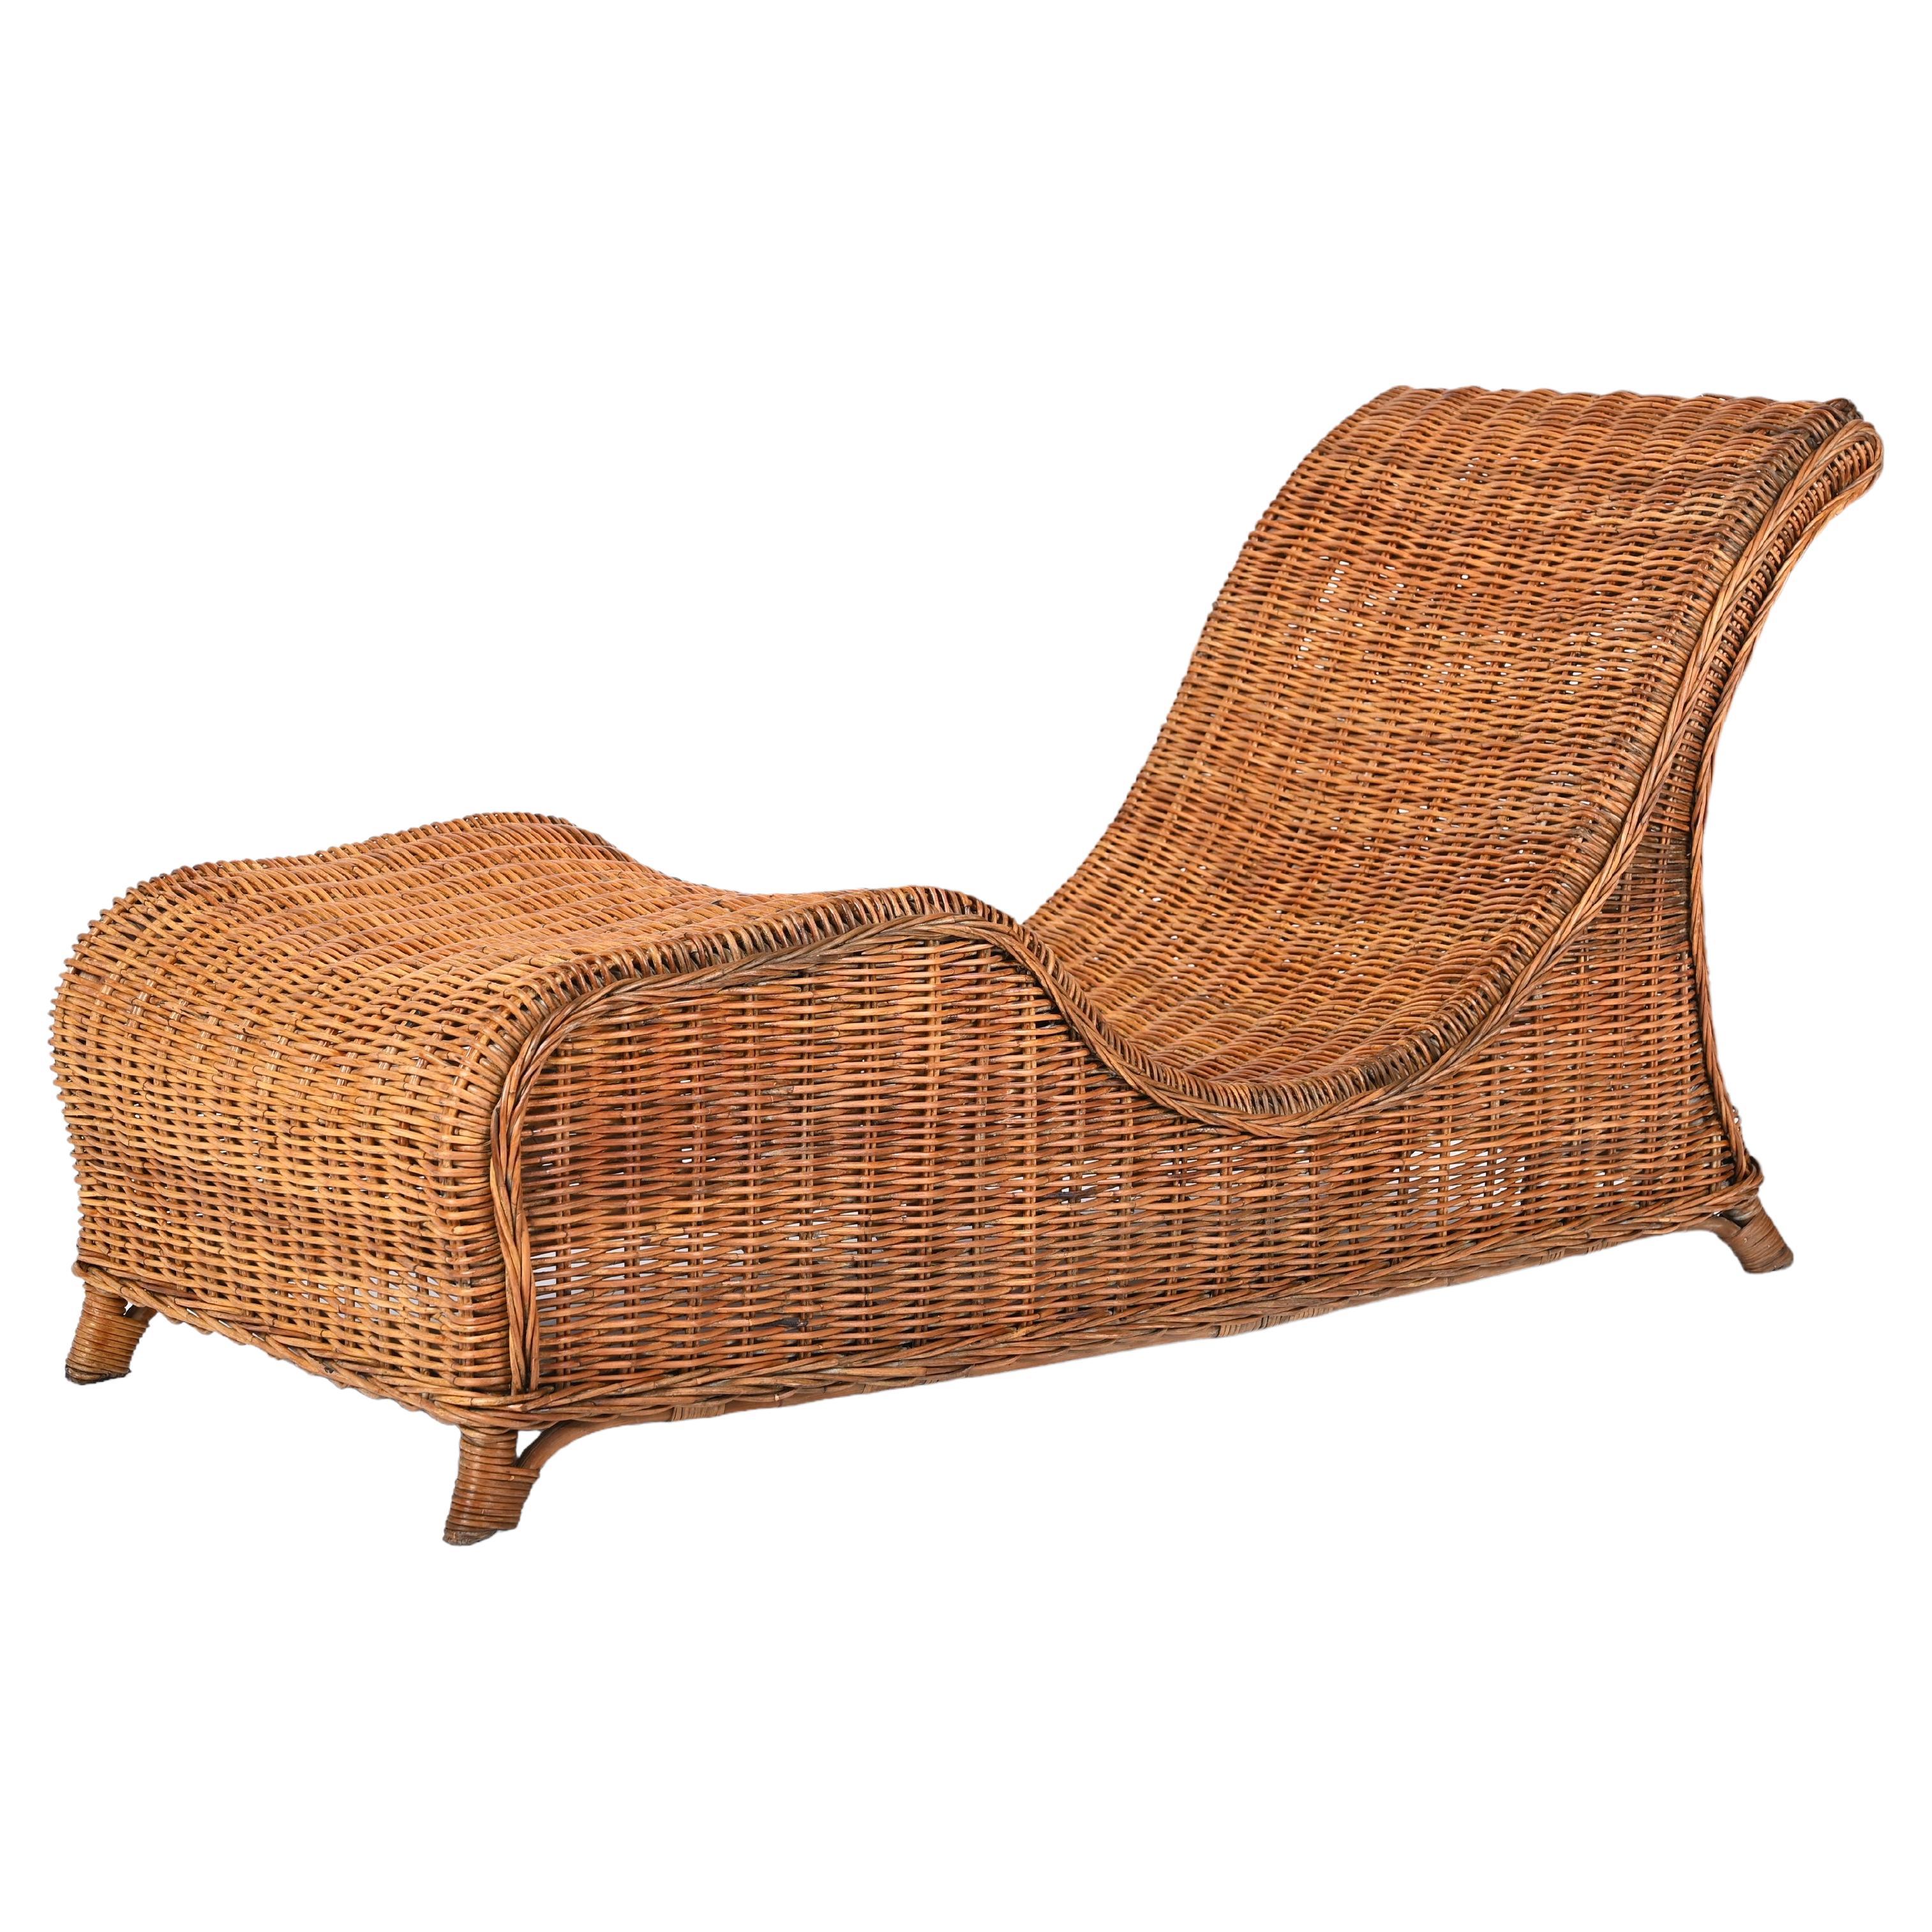 Midcentury Modern Bamboo and Wicker Italian Chaise Longue, 1960s For Sale